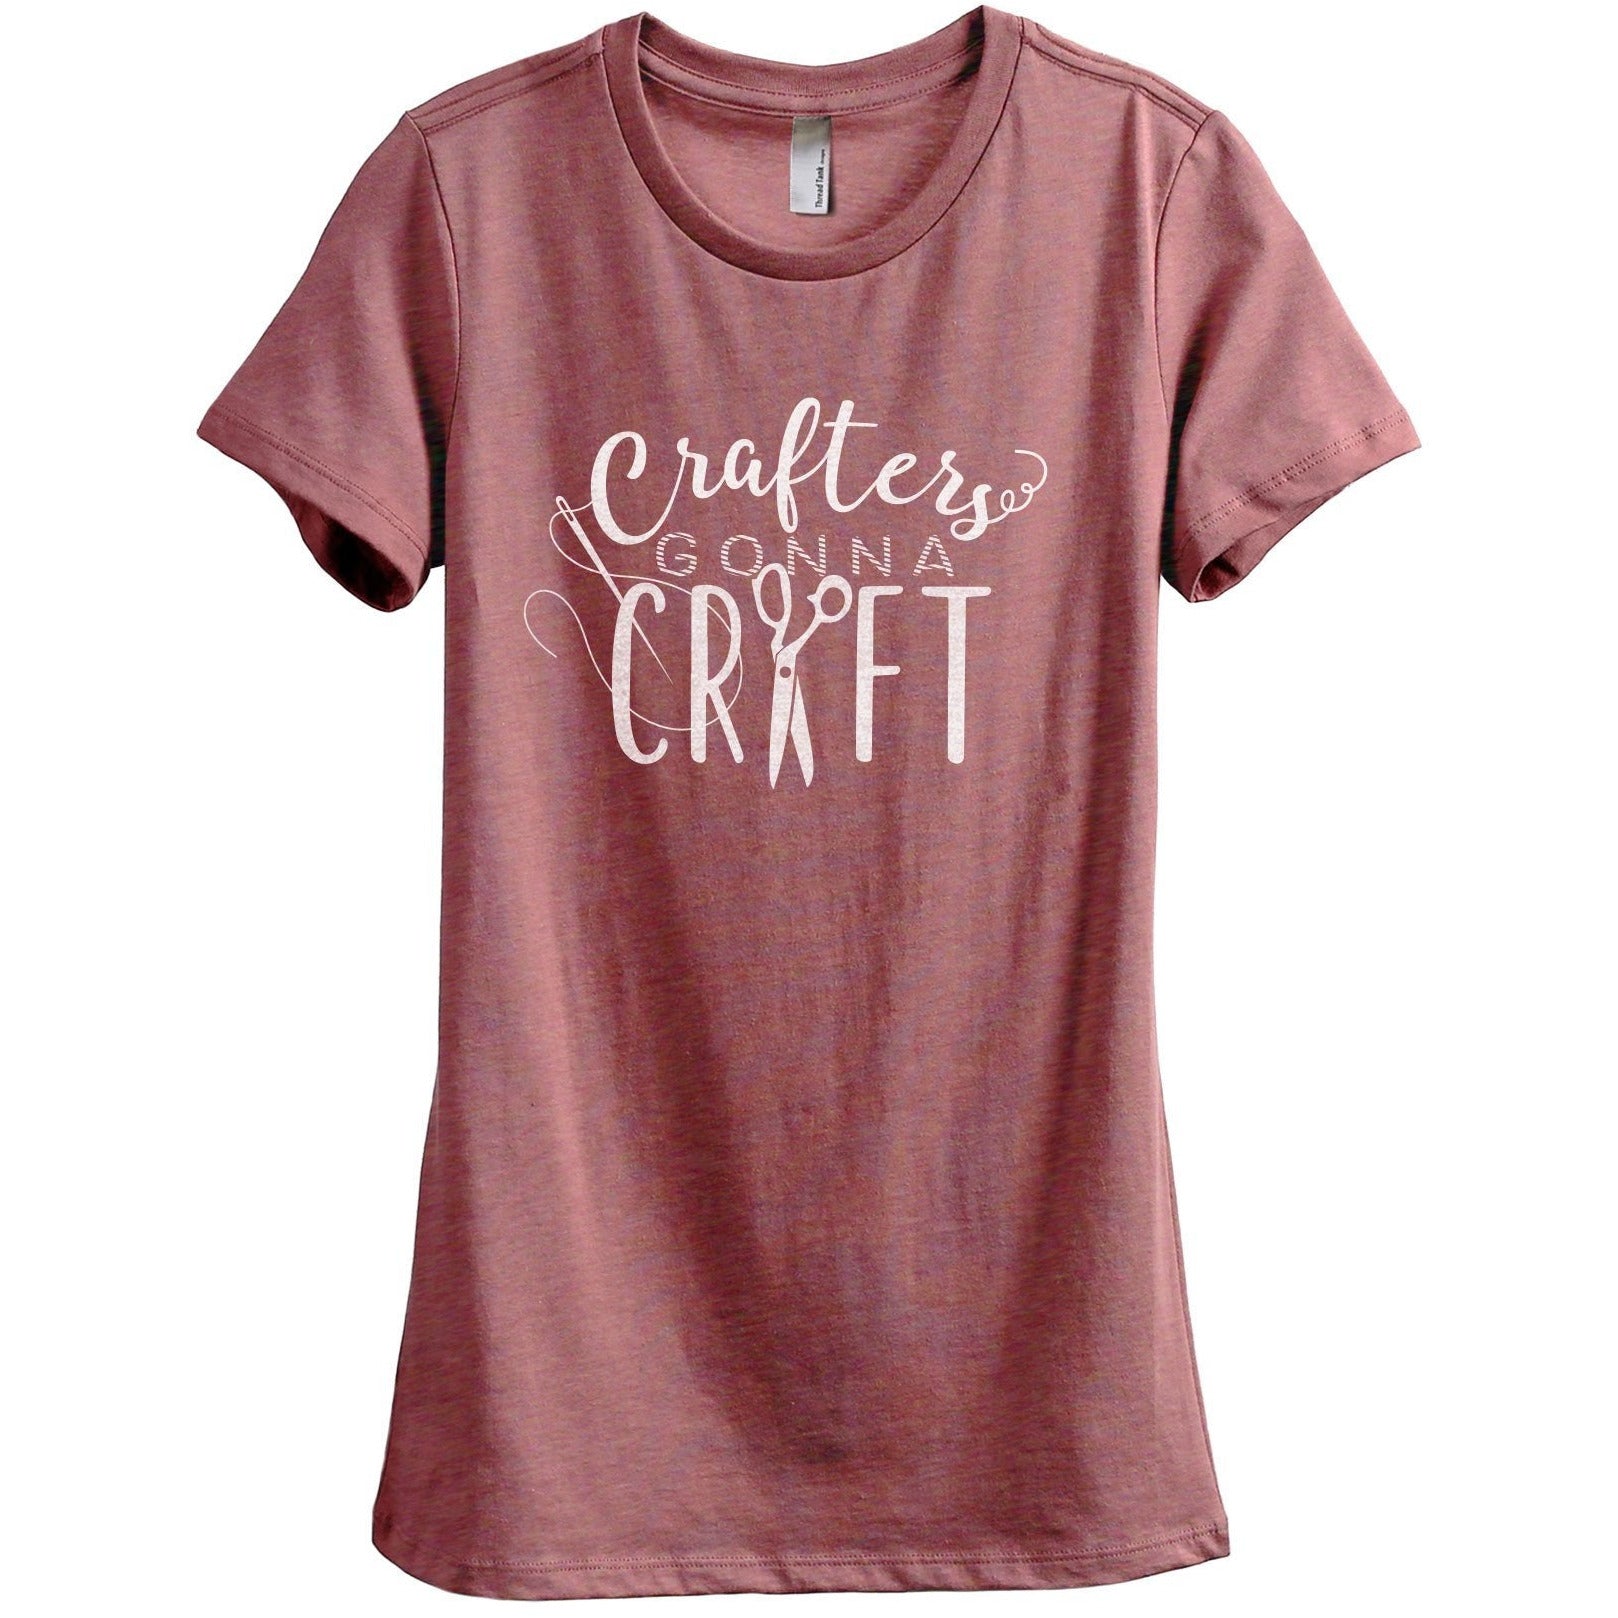 Crafters Gonna Craft Women's Relaxed Crewneck T-Shirt Top Tee Heather Rouge